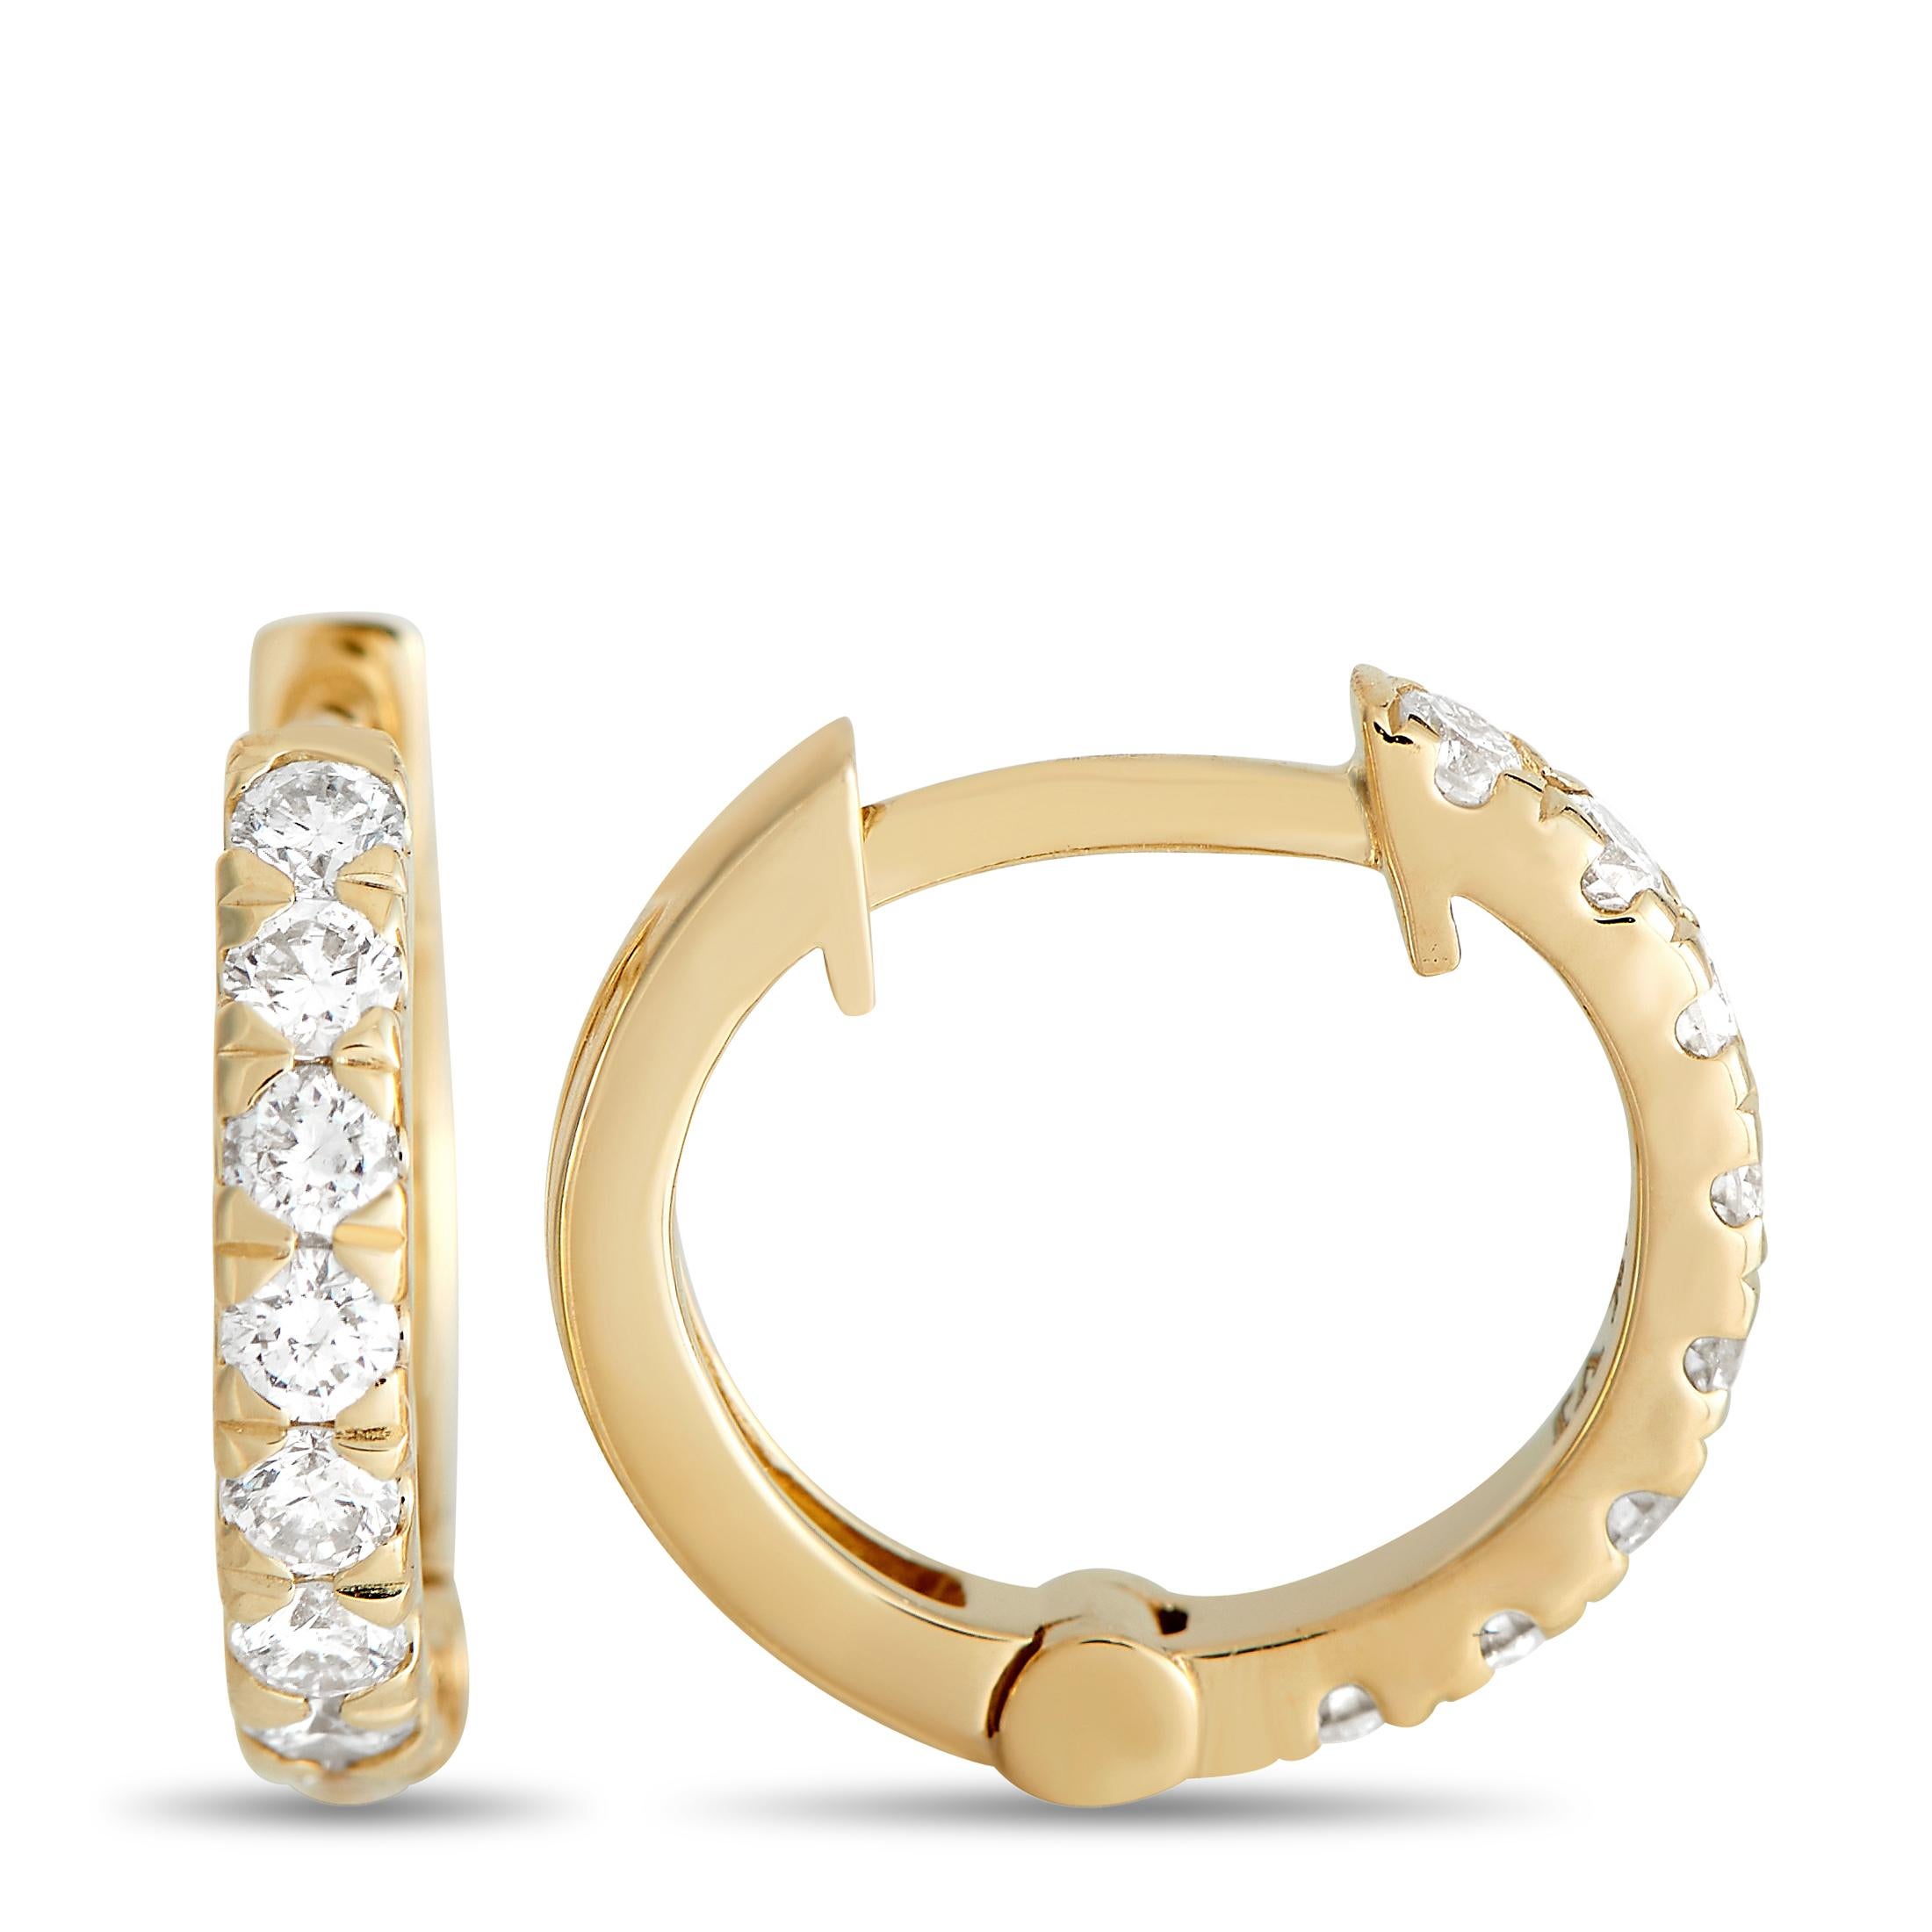 Here is a pair of yellow gold hoop earrings great as a gift for someone special or for yourself. This elegant pair can instantly give office attires or smart casual outfits a touch of sophistication. Each 0.37-inch hoop has its front face adorned